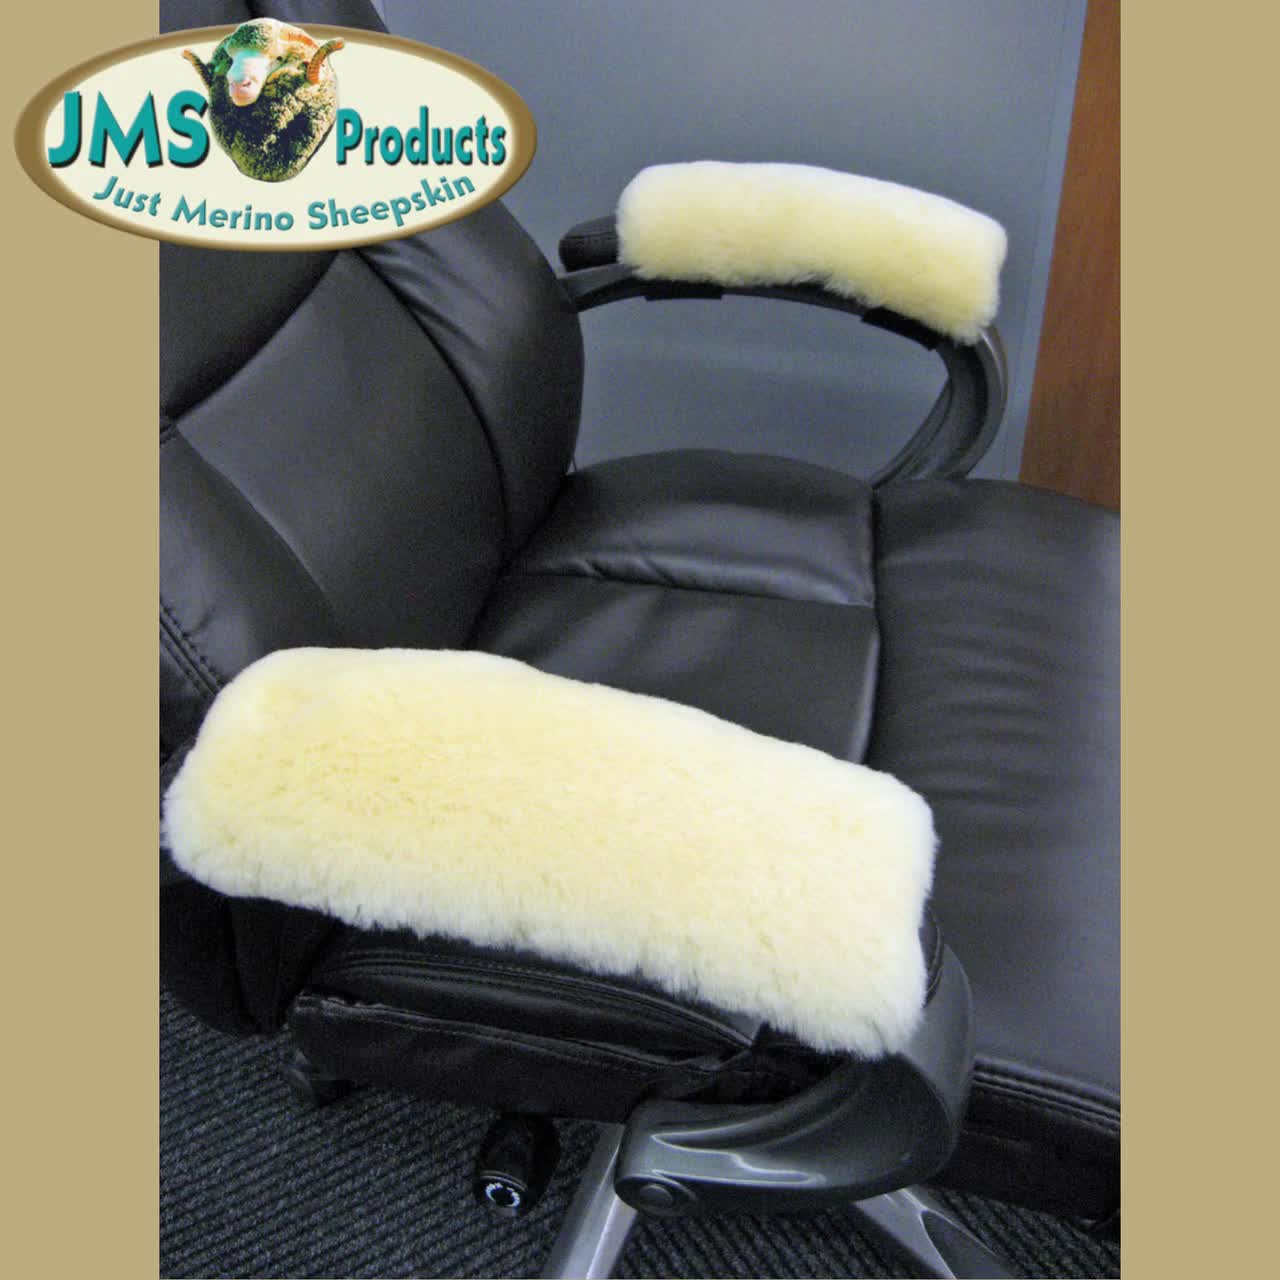 PAIR of 10-inch Long Authentic Australian Merino Sheepskin ARM REST Covers  to Pad Office Chairs or Wheel Chair Arms 